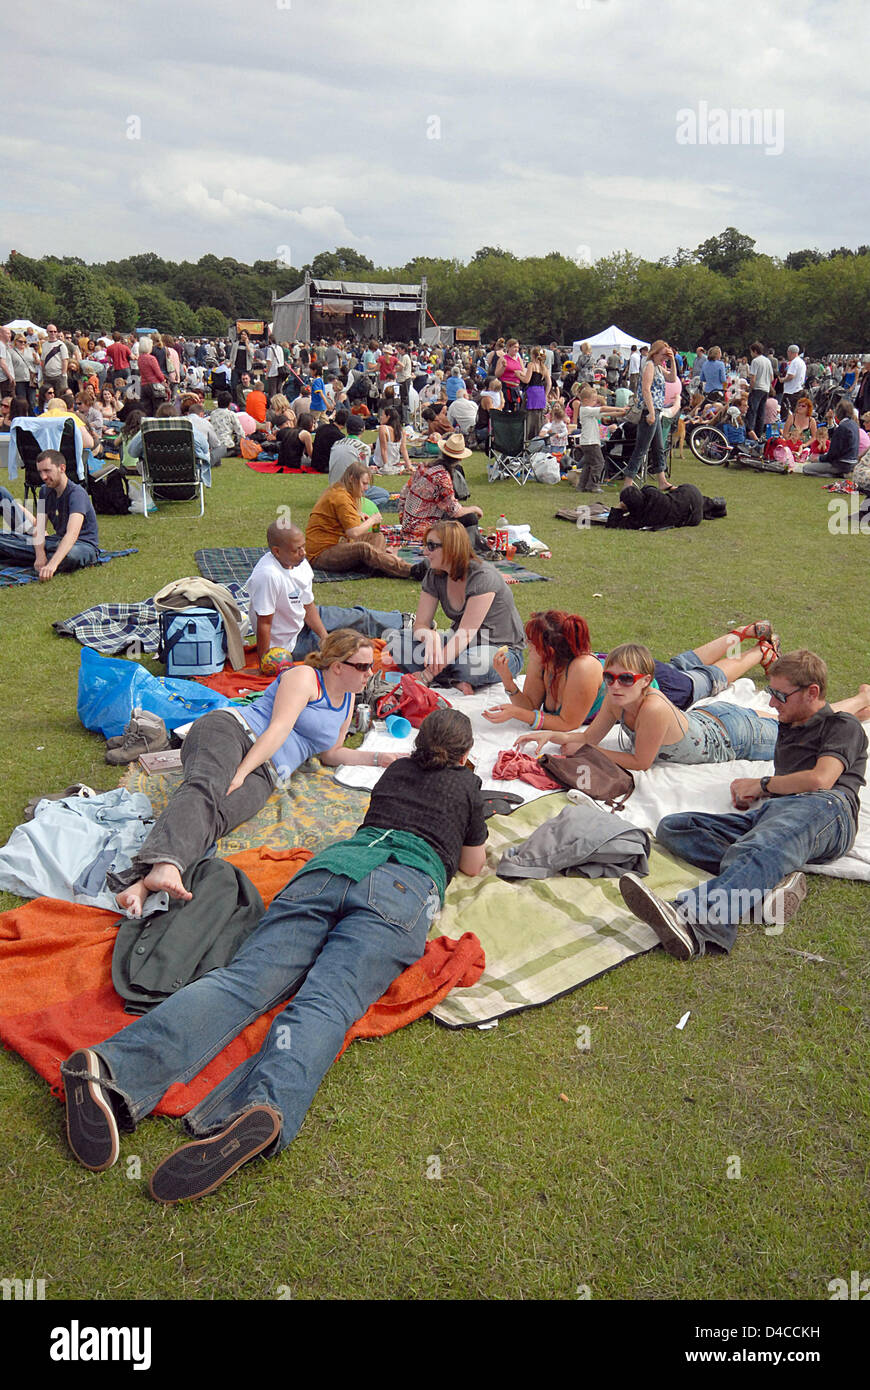 (dpa file) The file picture dated August 2007 shows visitors to the annual Oye Festival, a festival on African music, in Liverpool, United Kingdom. Liverpool, listed on the UNESCO World Heritage Site list since 2004, is the European Capital of Culture 2008. Photo: Guenter Schenk Stock Photo